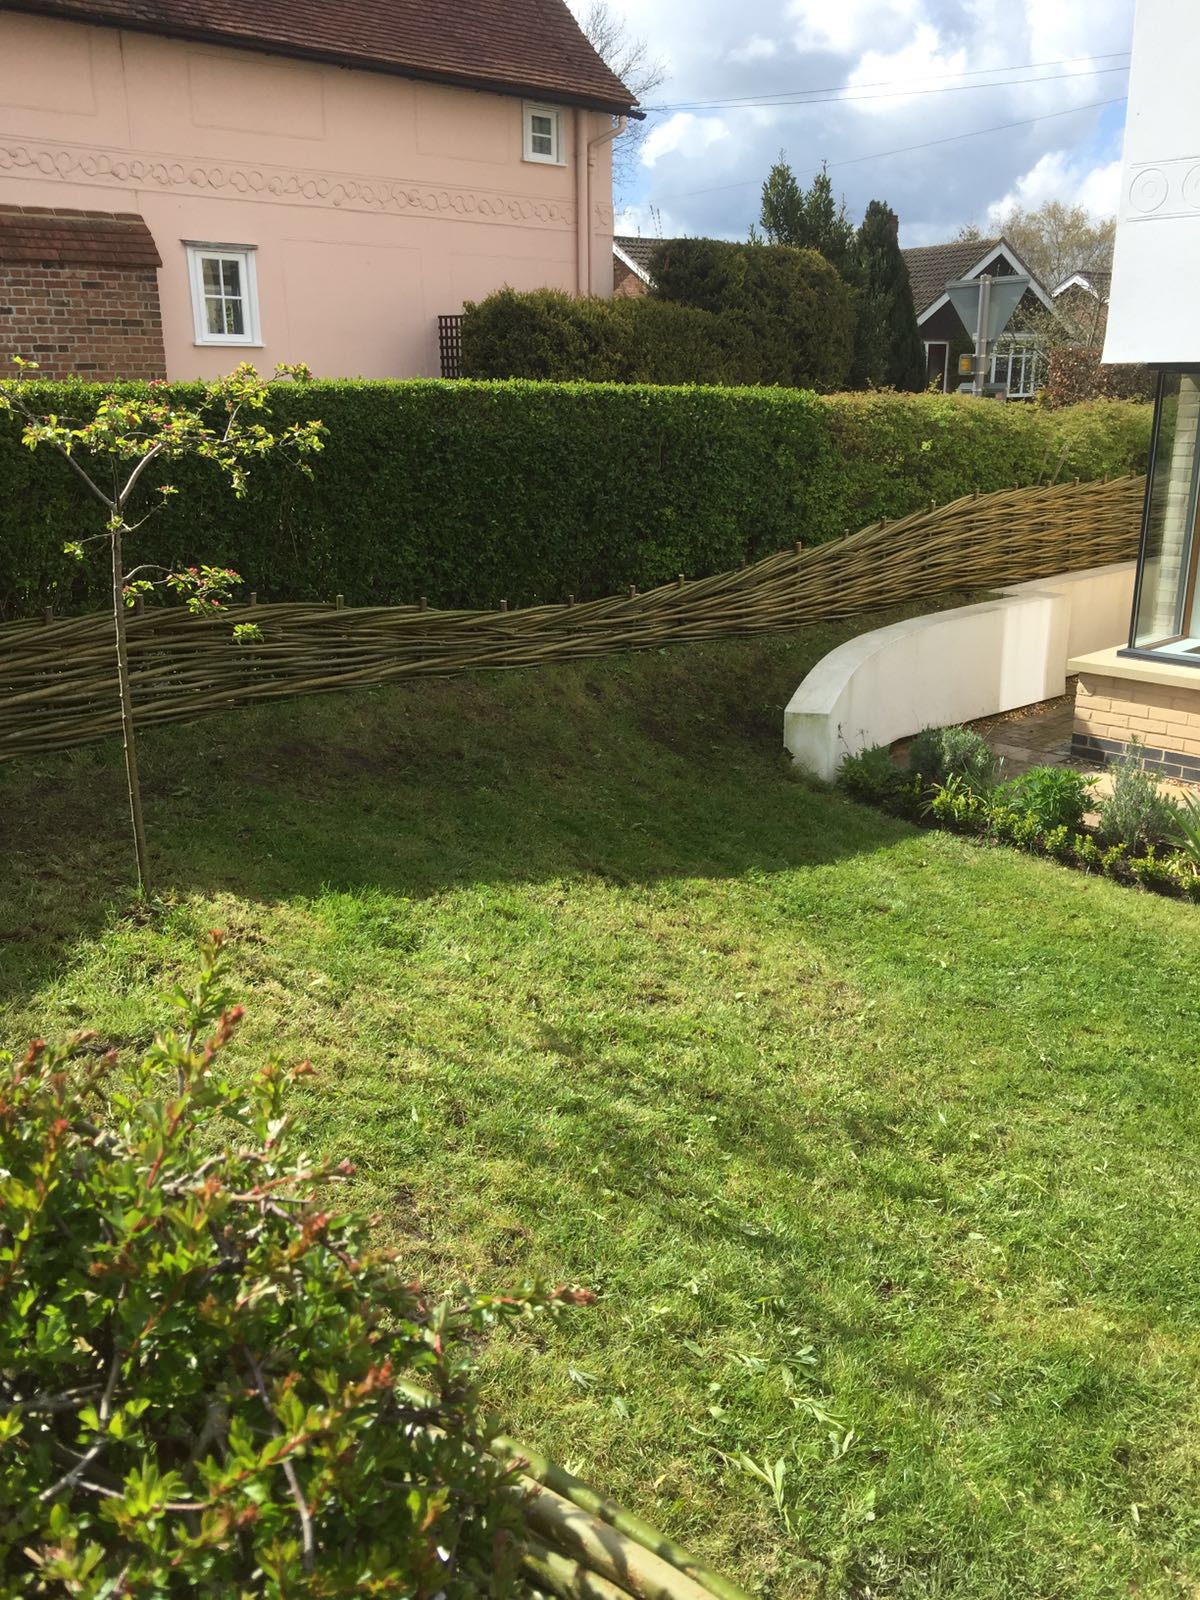 Gradual sloping willow fence